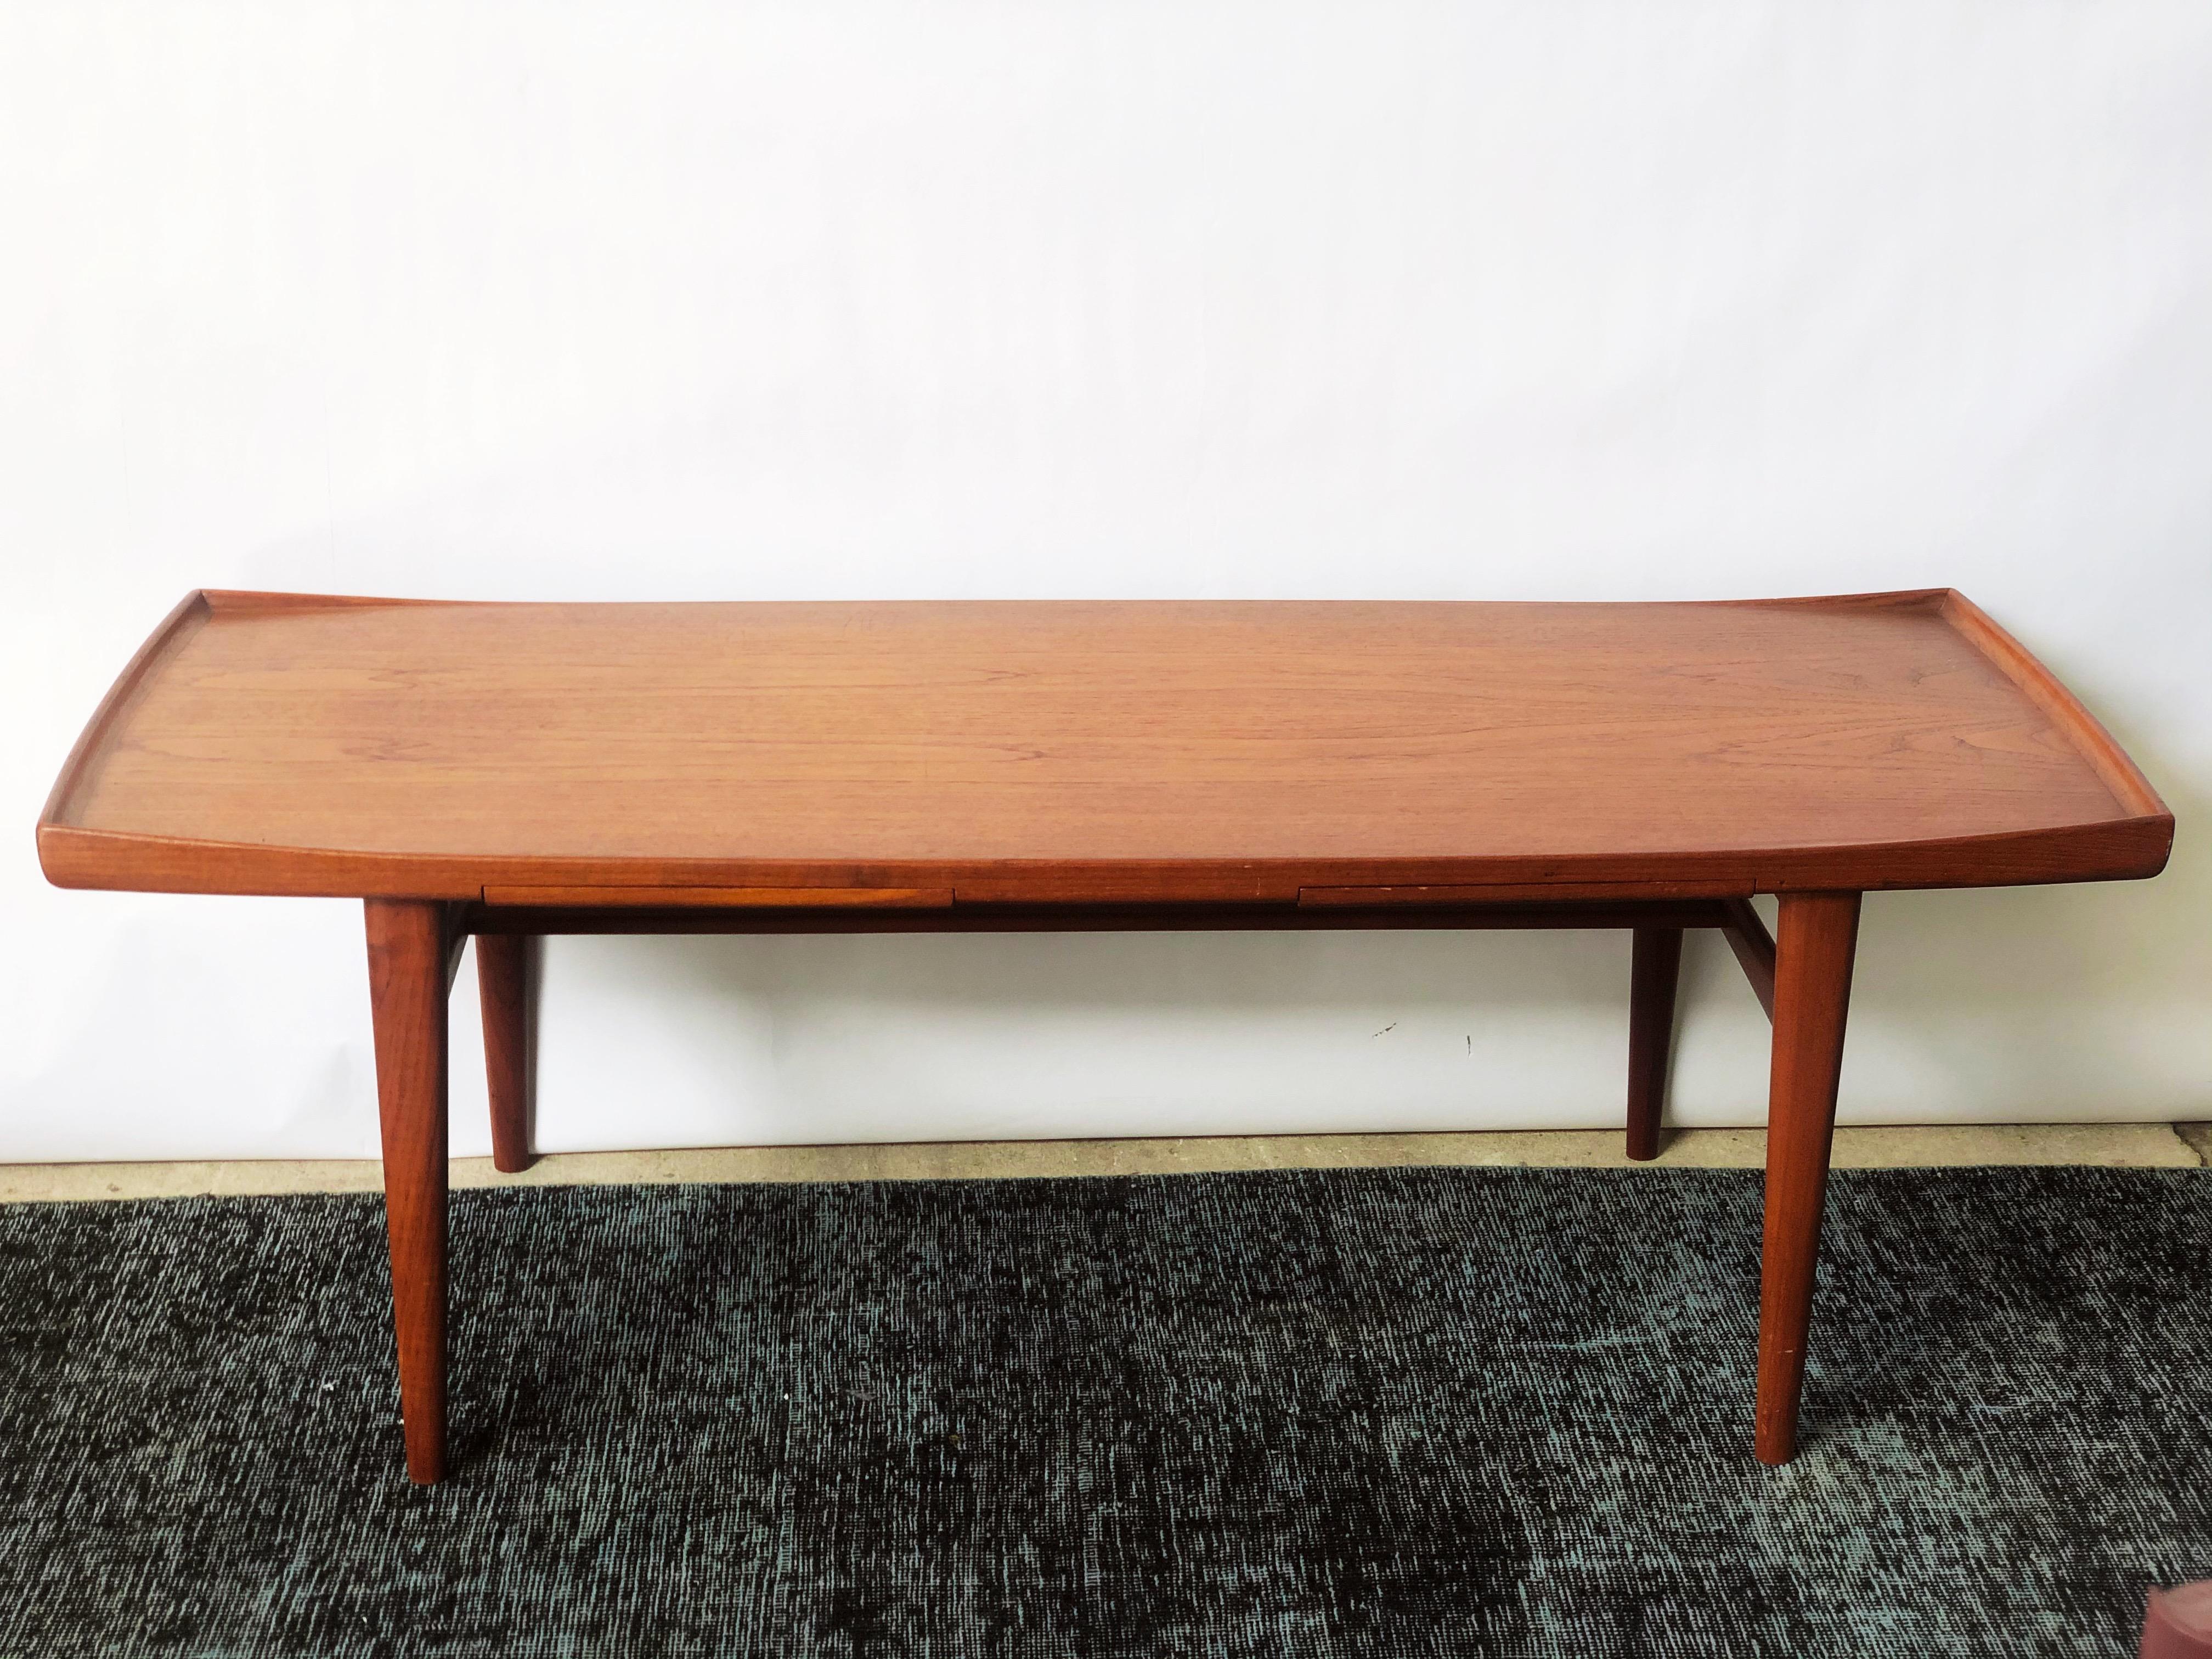 This vintage Danish modern teak coffee table by Swedish designer Alf Svensson is in overall great condition. The table features pull out trays that extend from either direction. The olive laminate provides an excellent surface area for beverages.